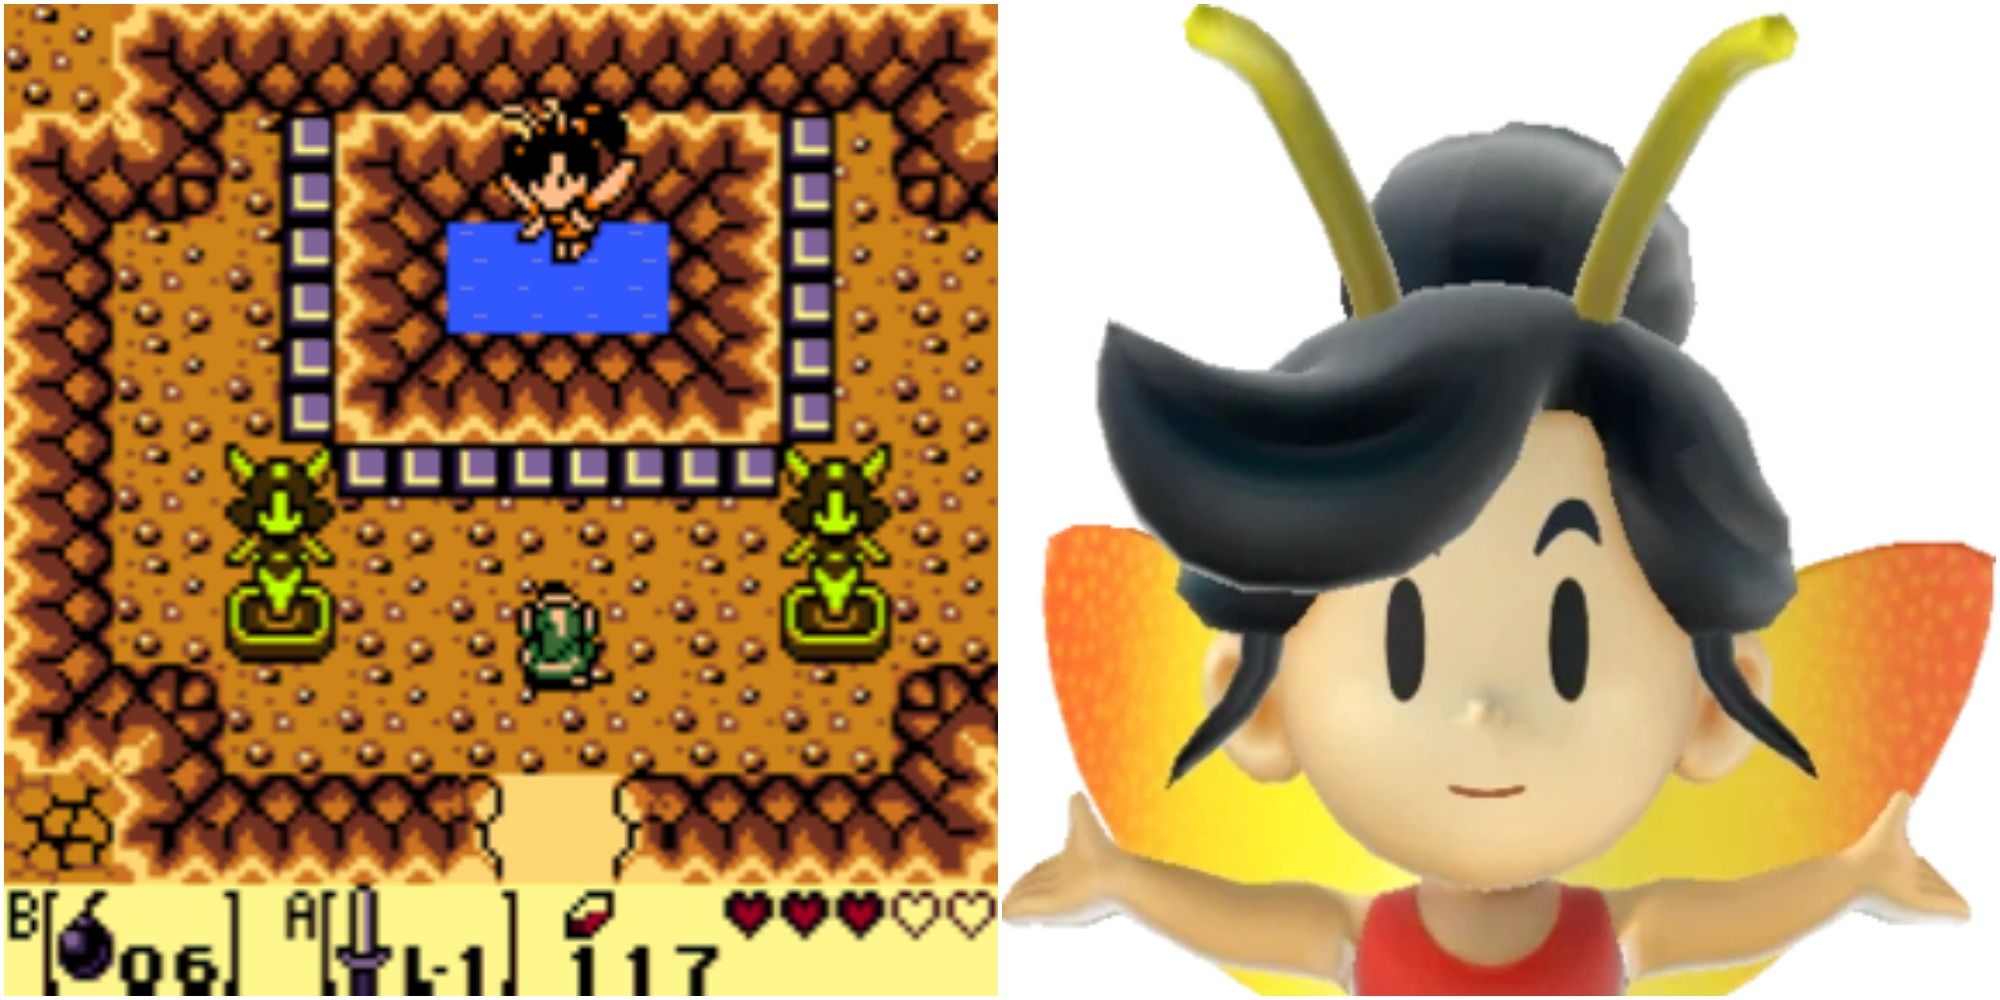 Split image showing a screenshot of Link visiting the Great Fairy’s fountain in Link’s Awakening and a close-up image of the updated model of the Great Fairy.